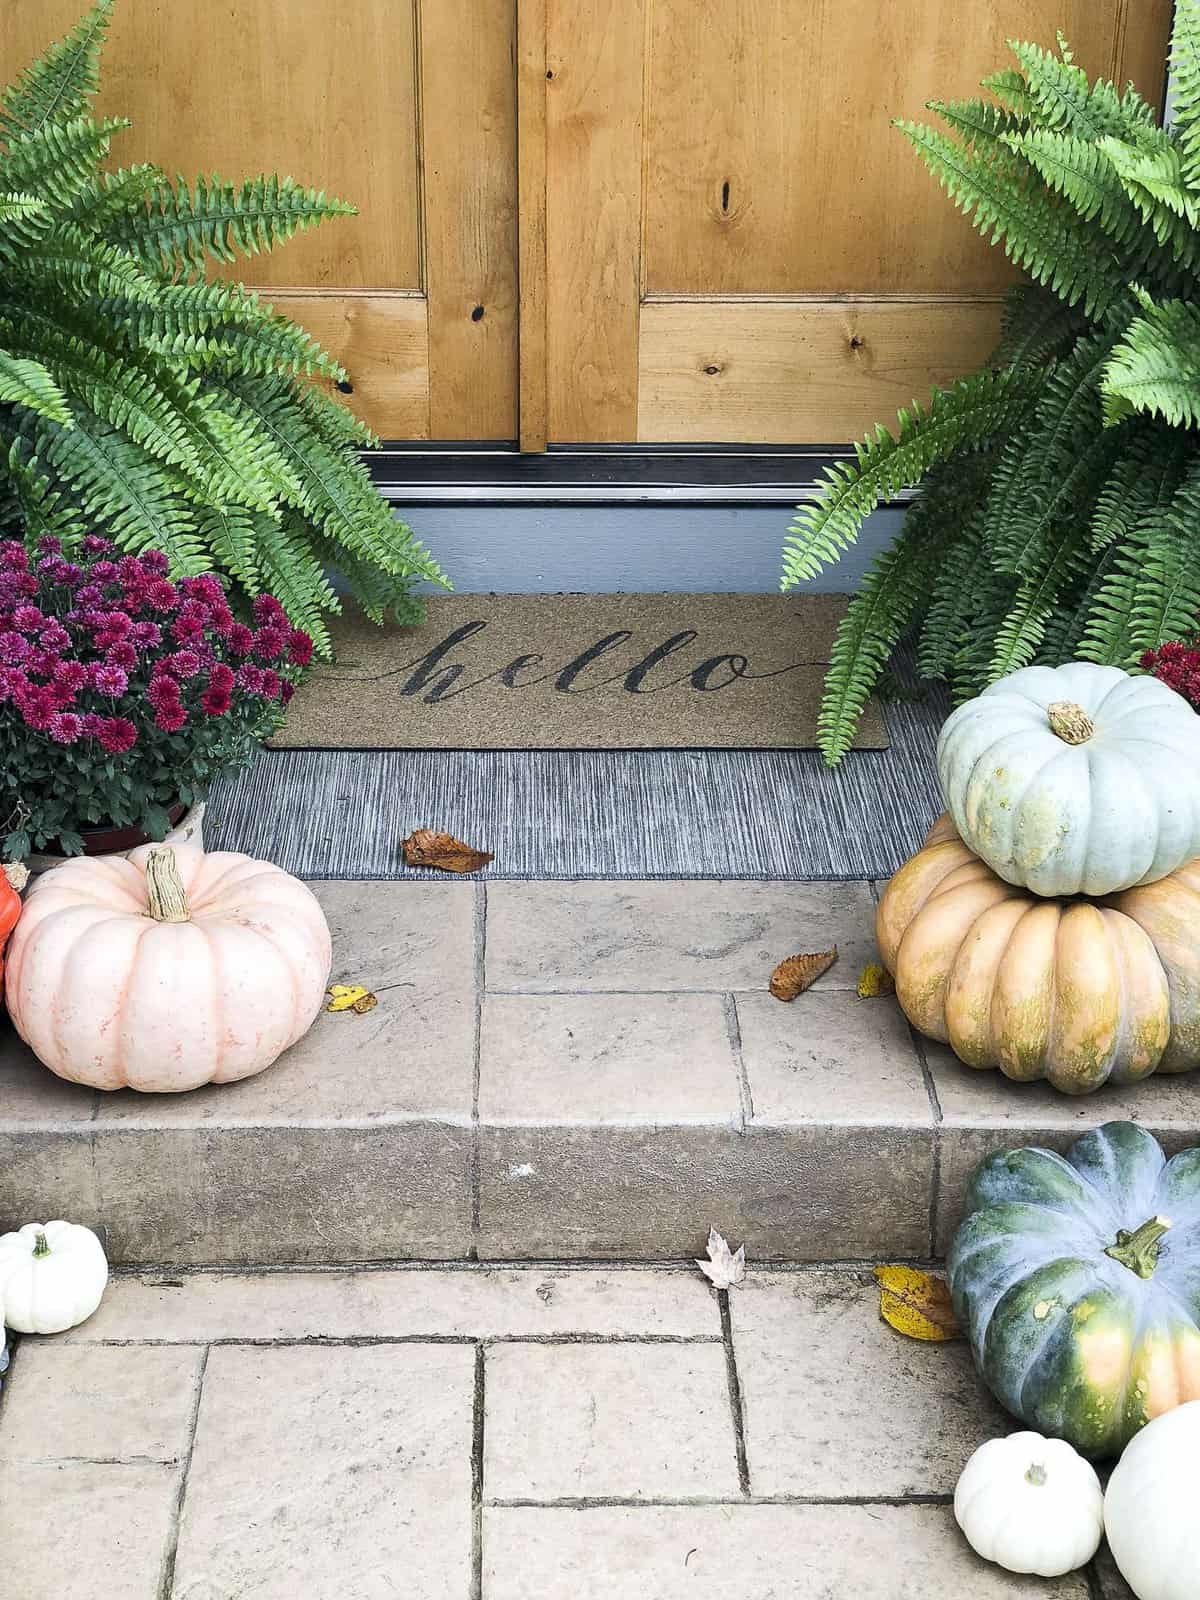 Click here to learn 3 easy steps for how to incorporate nature into your fall porch decor to create a beautiful, colorful and inviting fall front porch.